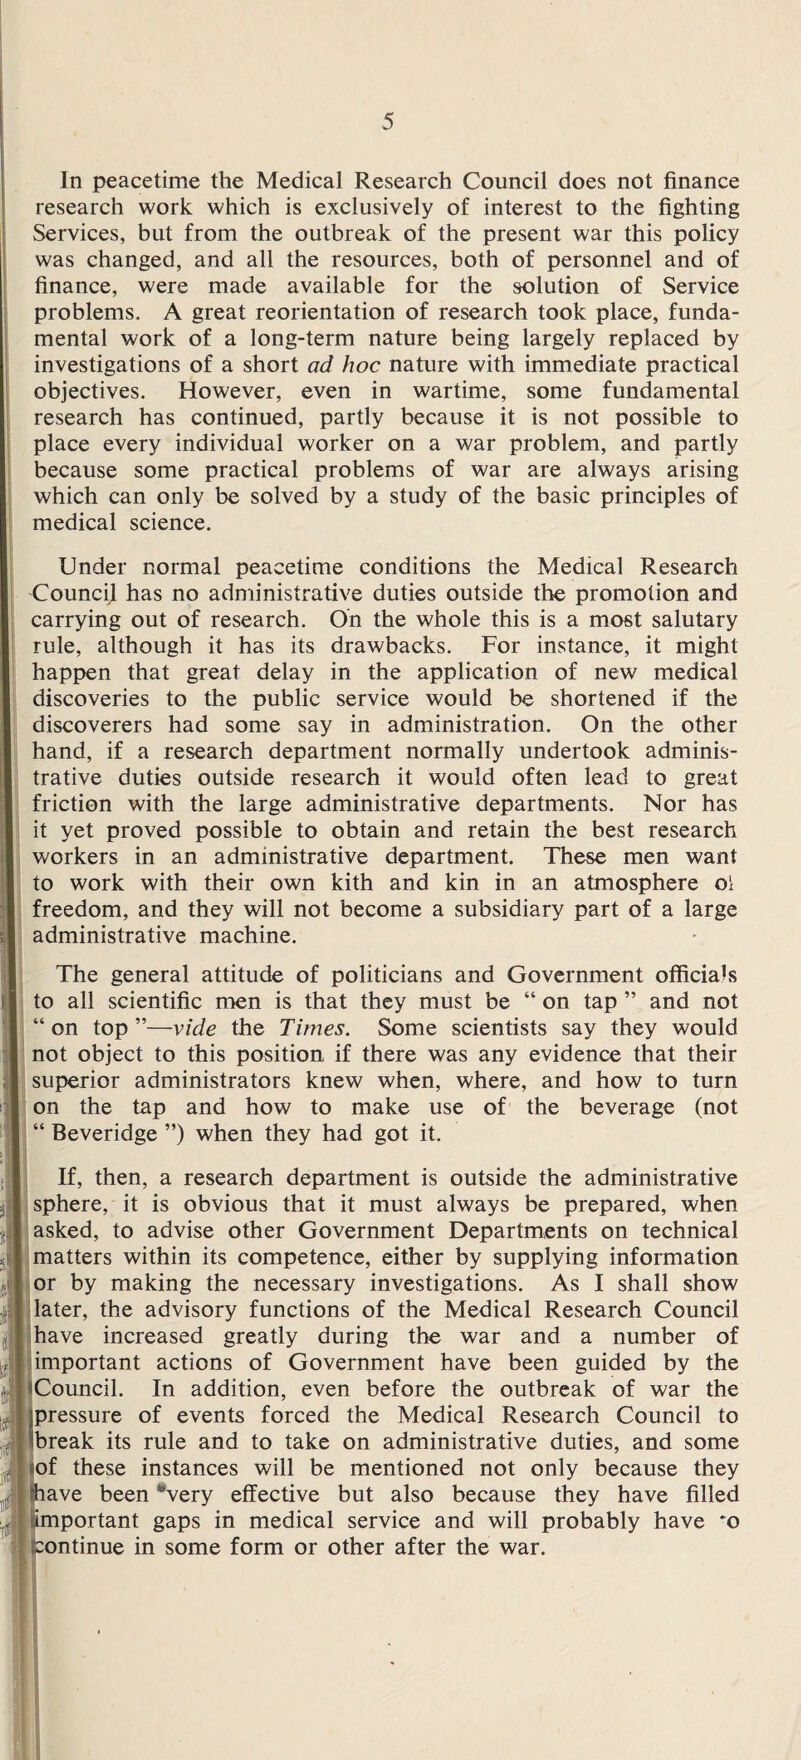 In peacetime the Medical Research Council does not finance research work which is exclusively of interest to the fighting Services, but from the outbreak of the present war this policy was changed, and all the resources, both of personnel and of finance, were made available for the solution of Service problems. A great reorientation of research took place, funda¬ mental work of a long-term nature being largely replaced by investigations of a short ad hoc nature with immediate practical objectives. However, even in wartime, some fundamental research has continued, partly because it is not possible to place every individual worker on a war problem, and partly because some practical problems of war are always arising which can only be solved by a study of the basic principles of medical science. Under normal peacetime conditions the Medical Research Council has no administrative duties outside the promotion and carrying out of research. On the whole this is a most salutary rule, although it has its drawbacks. For instance, it might happen that great delay in the application of new medical discoveries to the public service would be shortened if the discoverers had some say in administration. On the other hand, if a research department normally undertook adminis¬ trative duties outside research it would often lead to great friction with the large administrative departments. Nor has it yet proved possible to obtain and retain the best research workers in an administrative department. These men want to work with their own kith and kin in an atmosphere o\ freedom, and they will not become a subsidiary part of a large administrative machine. The general attitude of politicians and Government officials to all scientific men is that they must be “ on tap ” and not “on top”—vide the Times. Some scientists say they would not object to this position if there was any evidence that their superior administrators knew when, where, and how to turn on the tap and how to make use of the beverage (not “ Beveridge ”) when they had got it. If, then, a research department is outside the administrative sphere, it is obvious that it must always be prepared, when asked, to advise other Government Departments on technical matters within its competence, either by supplying information or by making the necessary investigations. As I shall show later, the advisory functions of the Medical Research Council have increased greatly during the war and a number of important actions of Government have been guided by the Council. In addition, even before the outbreak of war the pressure of events forced the Medical Research Council to break its rule and to take on administrative duties, and some of these instances will be mentioned not only because they lave been *very effective but also because they have filled portant gaps in medical service and will probably have *o continue in some form or other after the war.